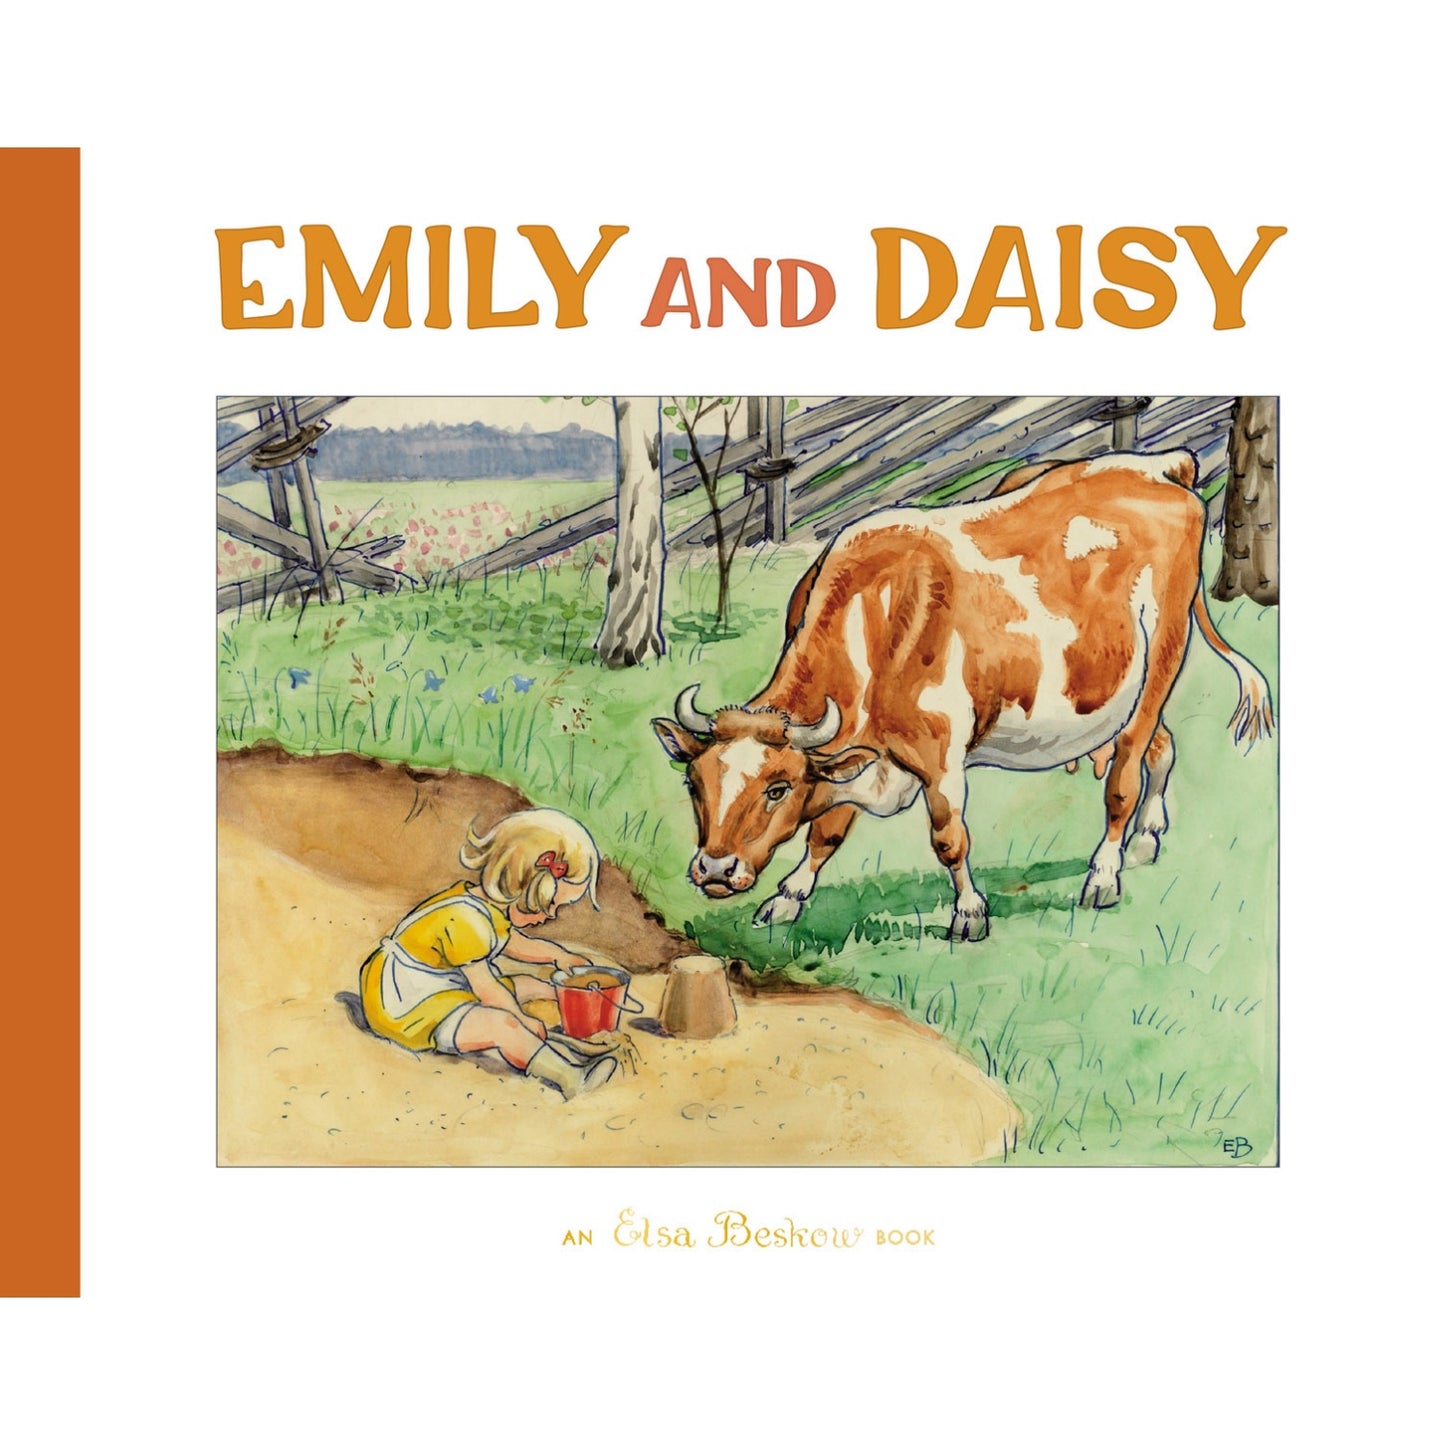 Emily and Daisy | Elsa Beskow | Hardcover | Tales & Myths for Children